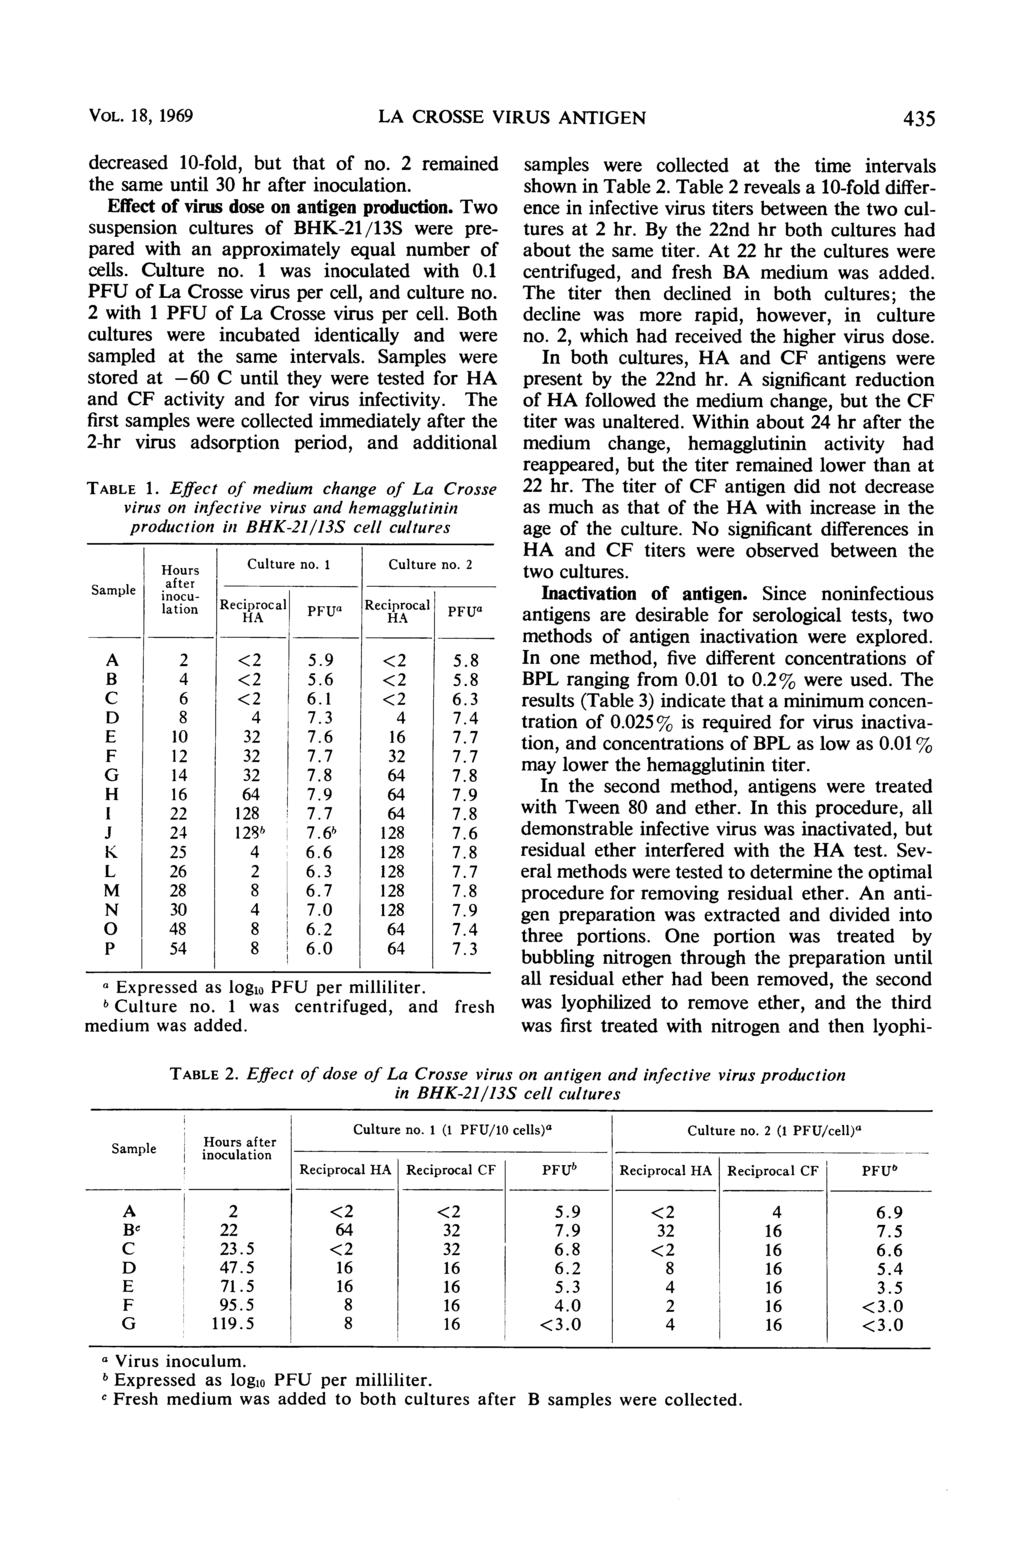 VOL. 18, 1969 LA CROSSE VIRUS ANTIGEN 35 decreased 10-fold, but that of no. 2 remained samples were collected at the time intervals the same until 30 hr after inocultation. shown in Table 2.